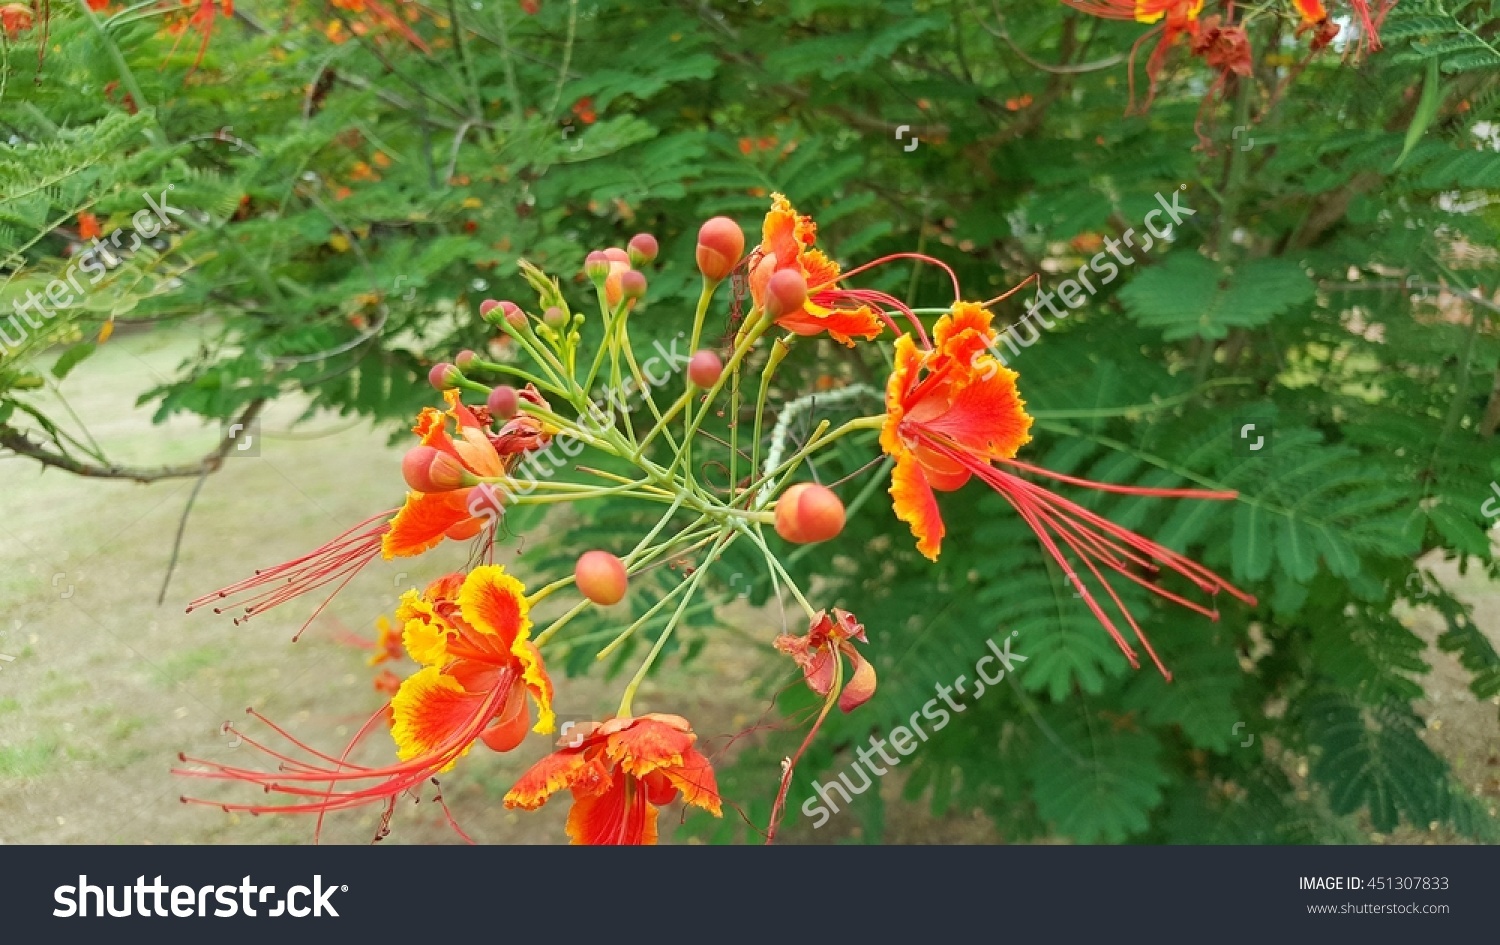 Flame flower panicle clipart 20 free Cliparts | Download images on ...